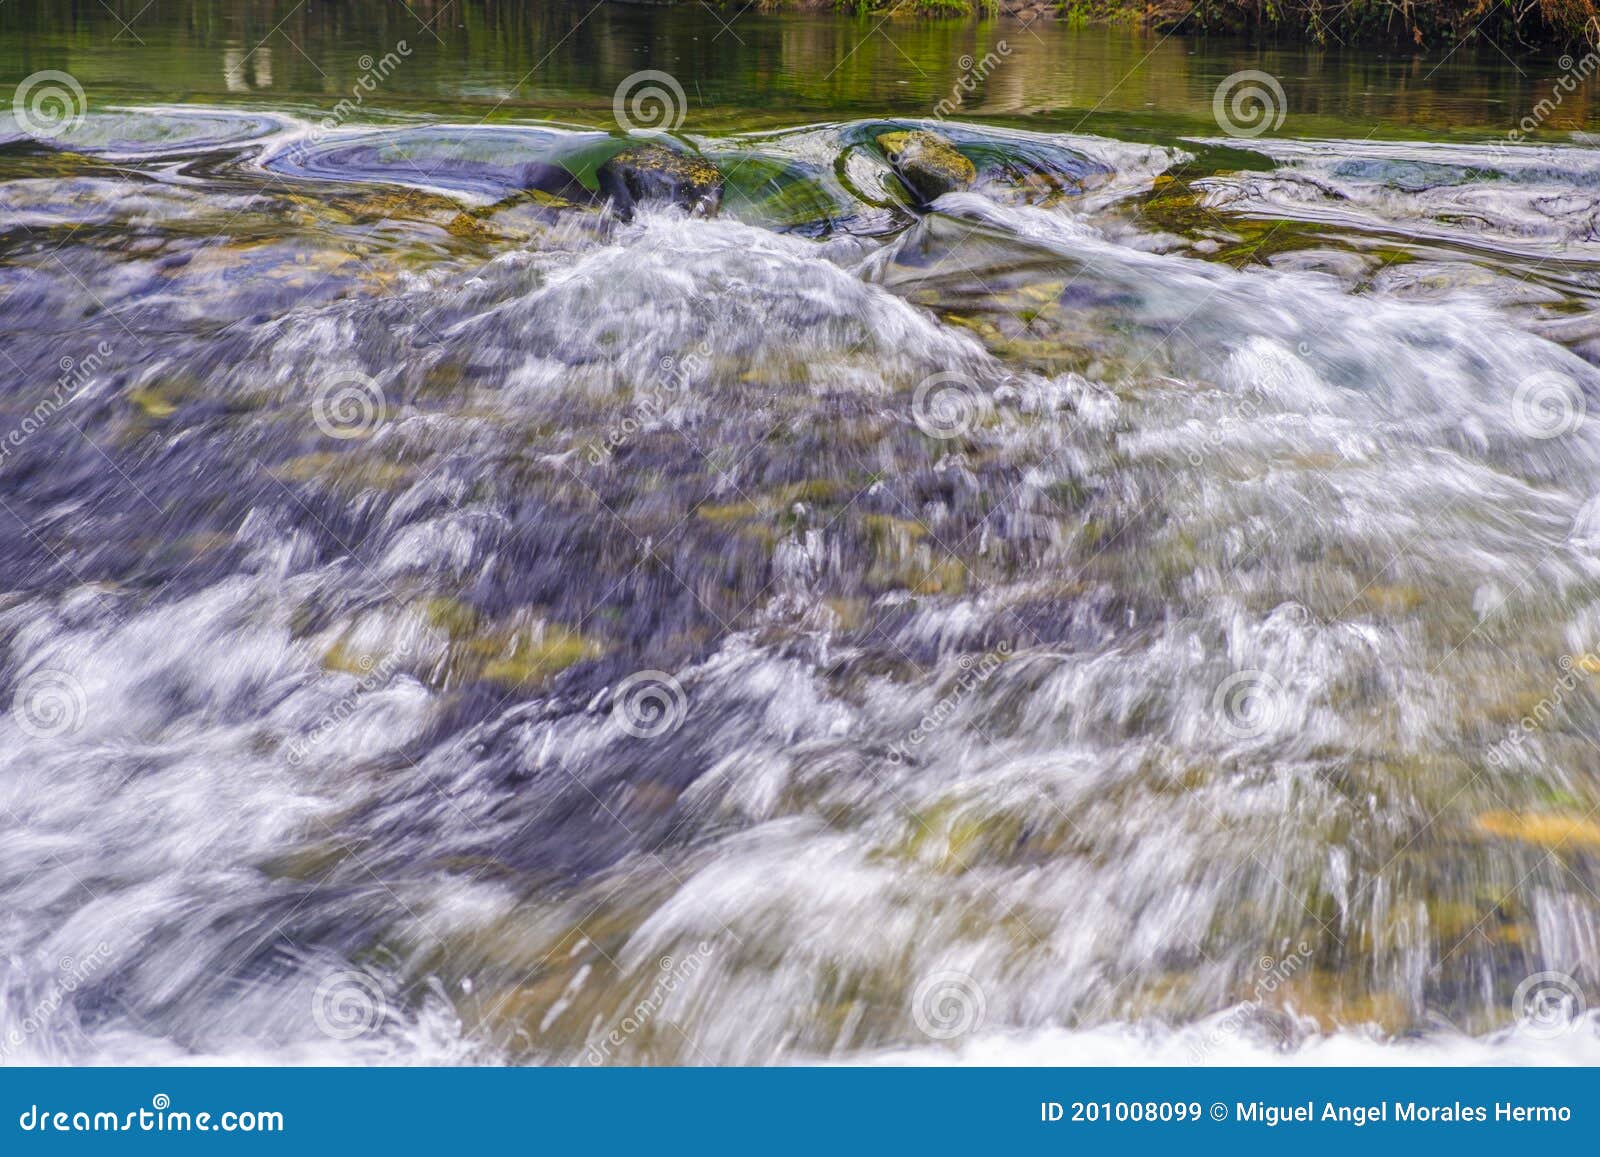 whirlpools and small waterfalls in o rosal, galicia spain